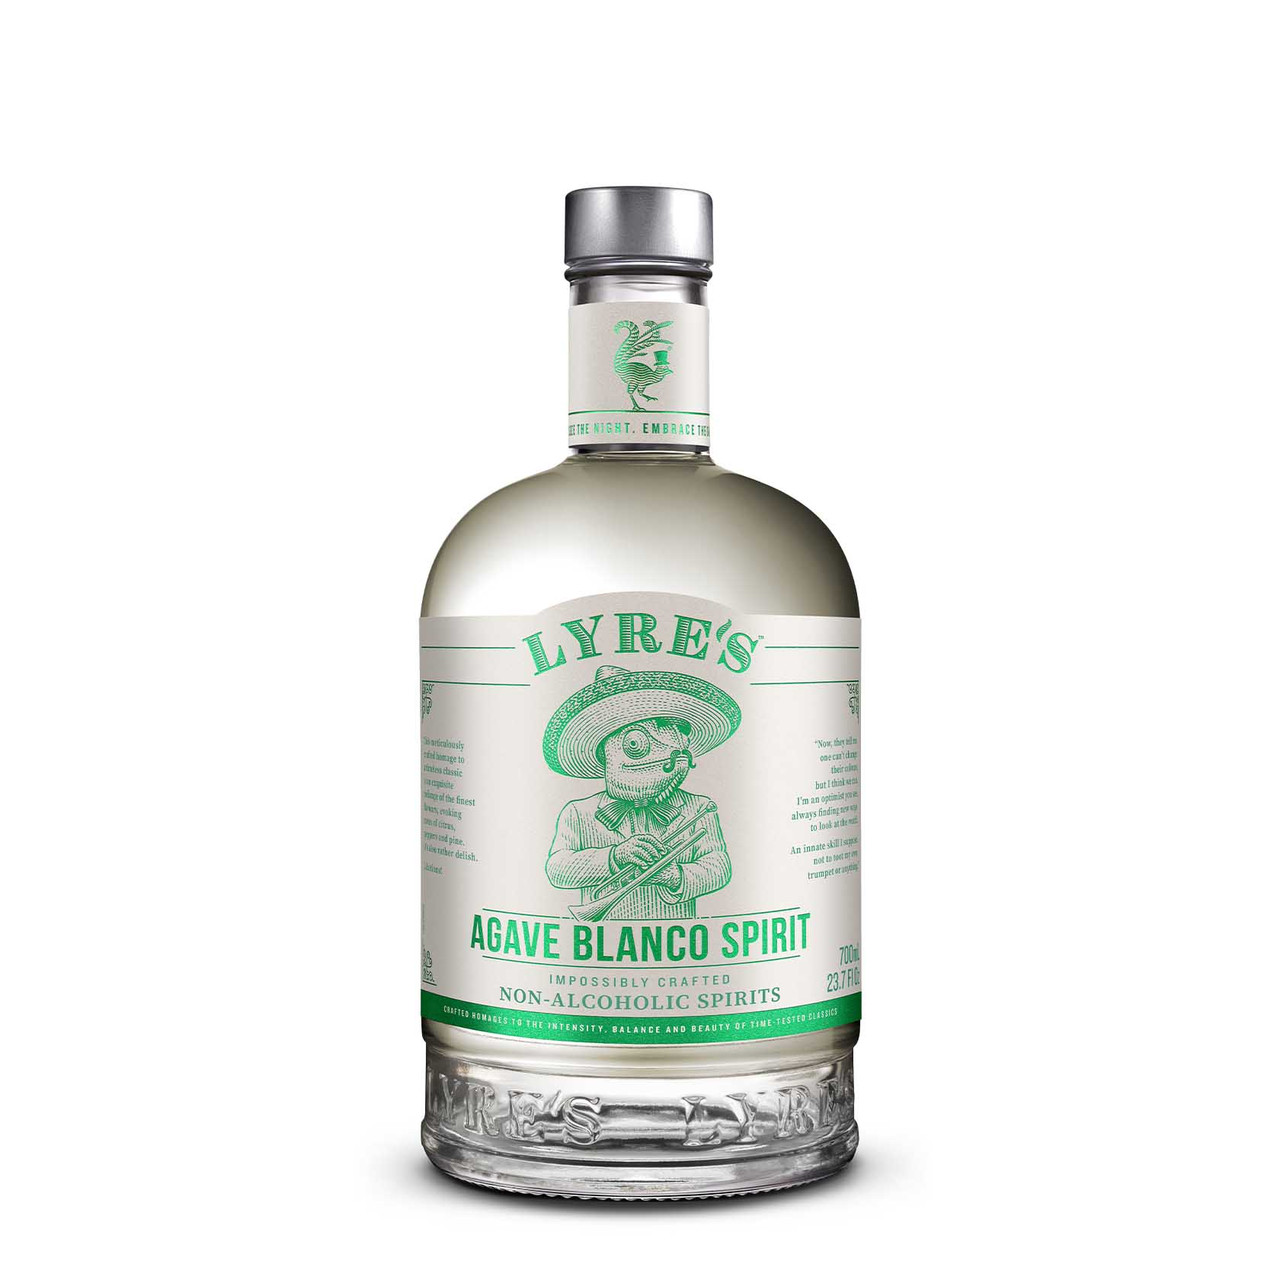 a clear bottle of lyres agave blanco spirit